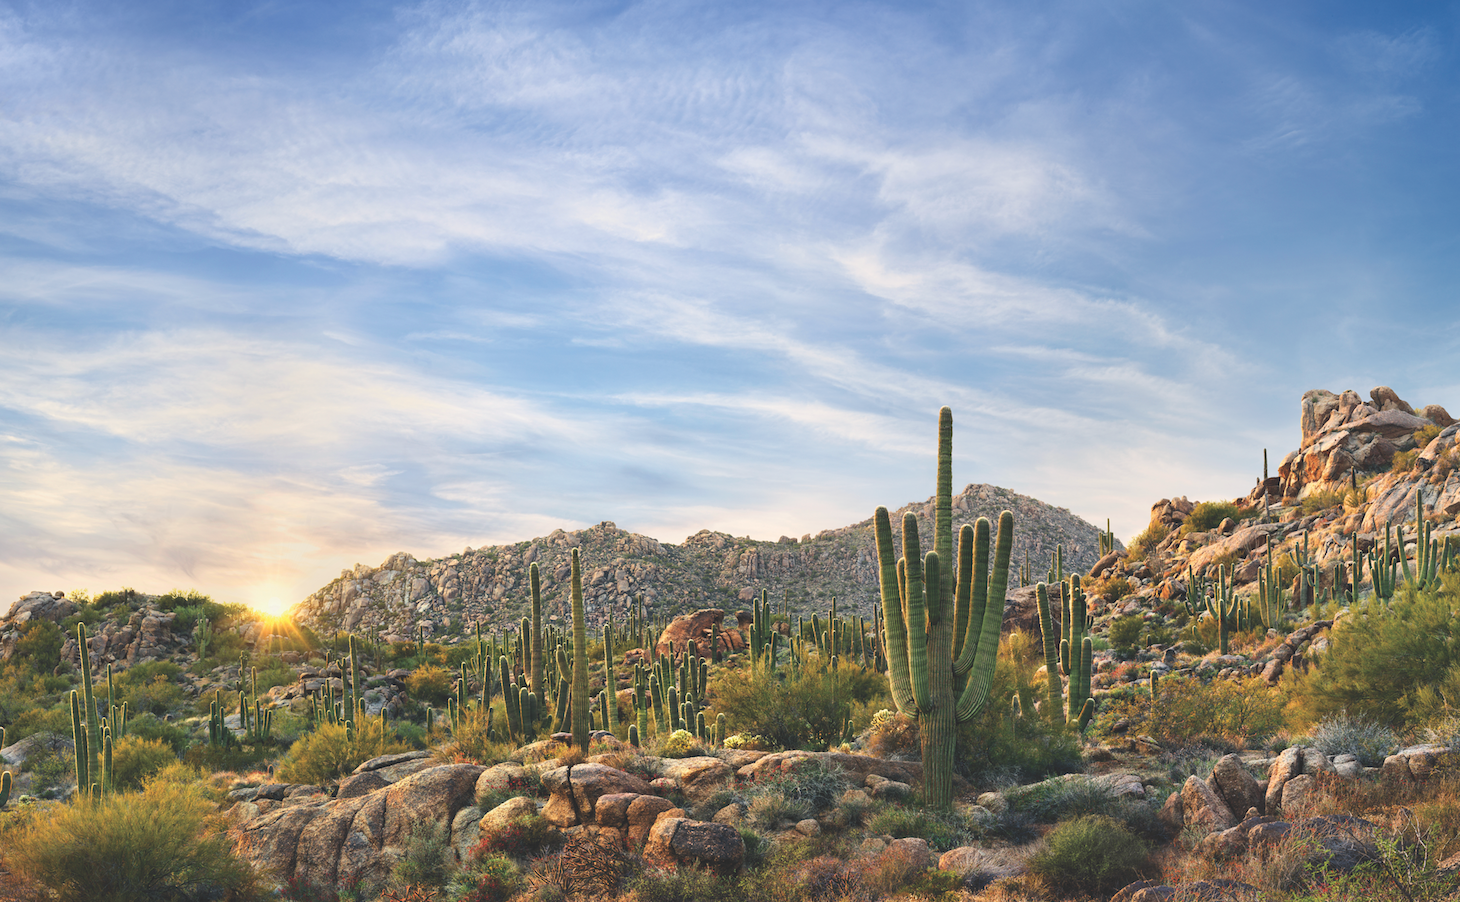 Where to Dine, Stay and Explore in Scottsdale